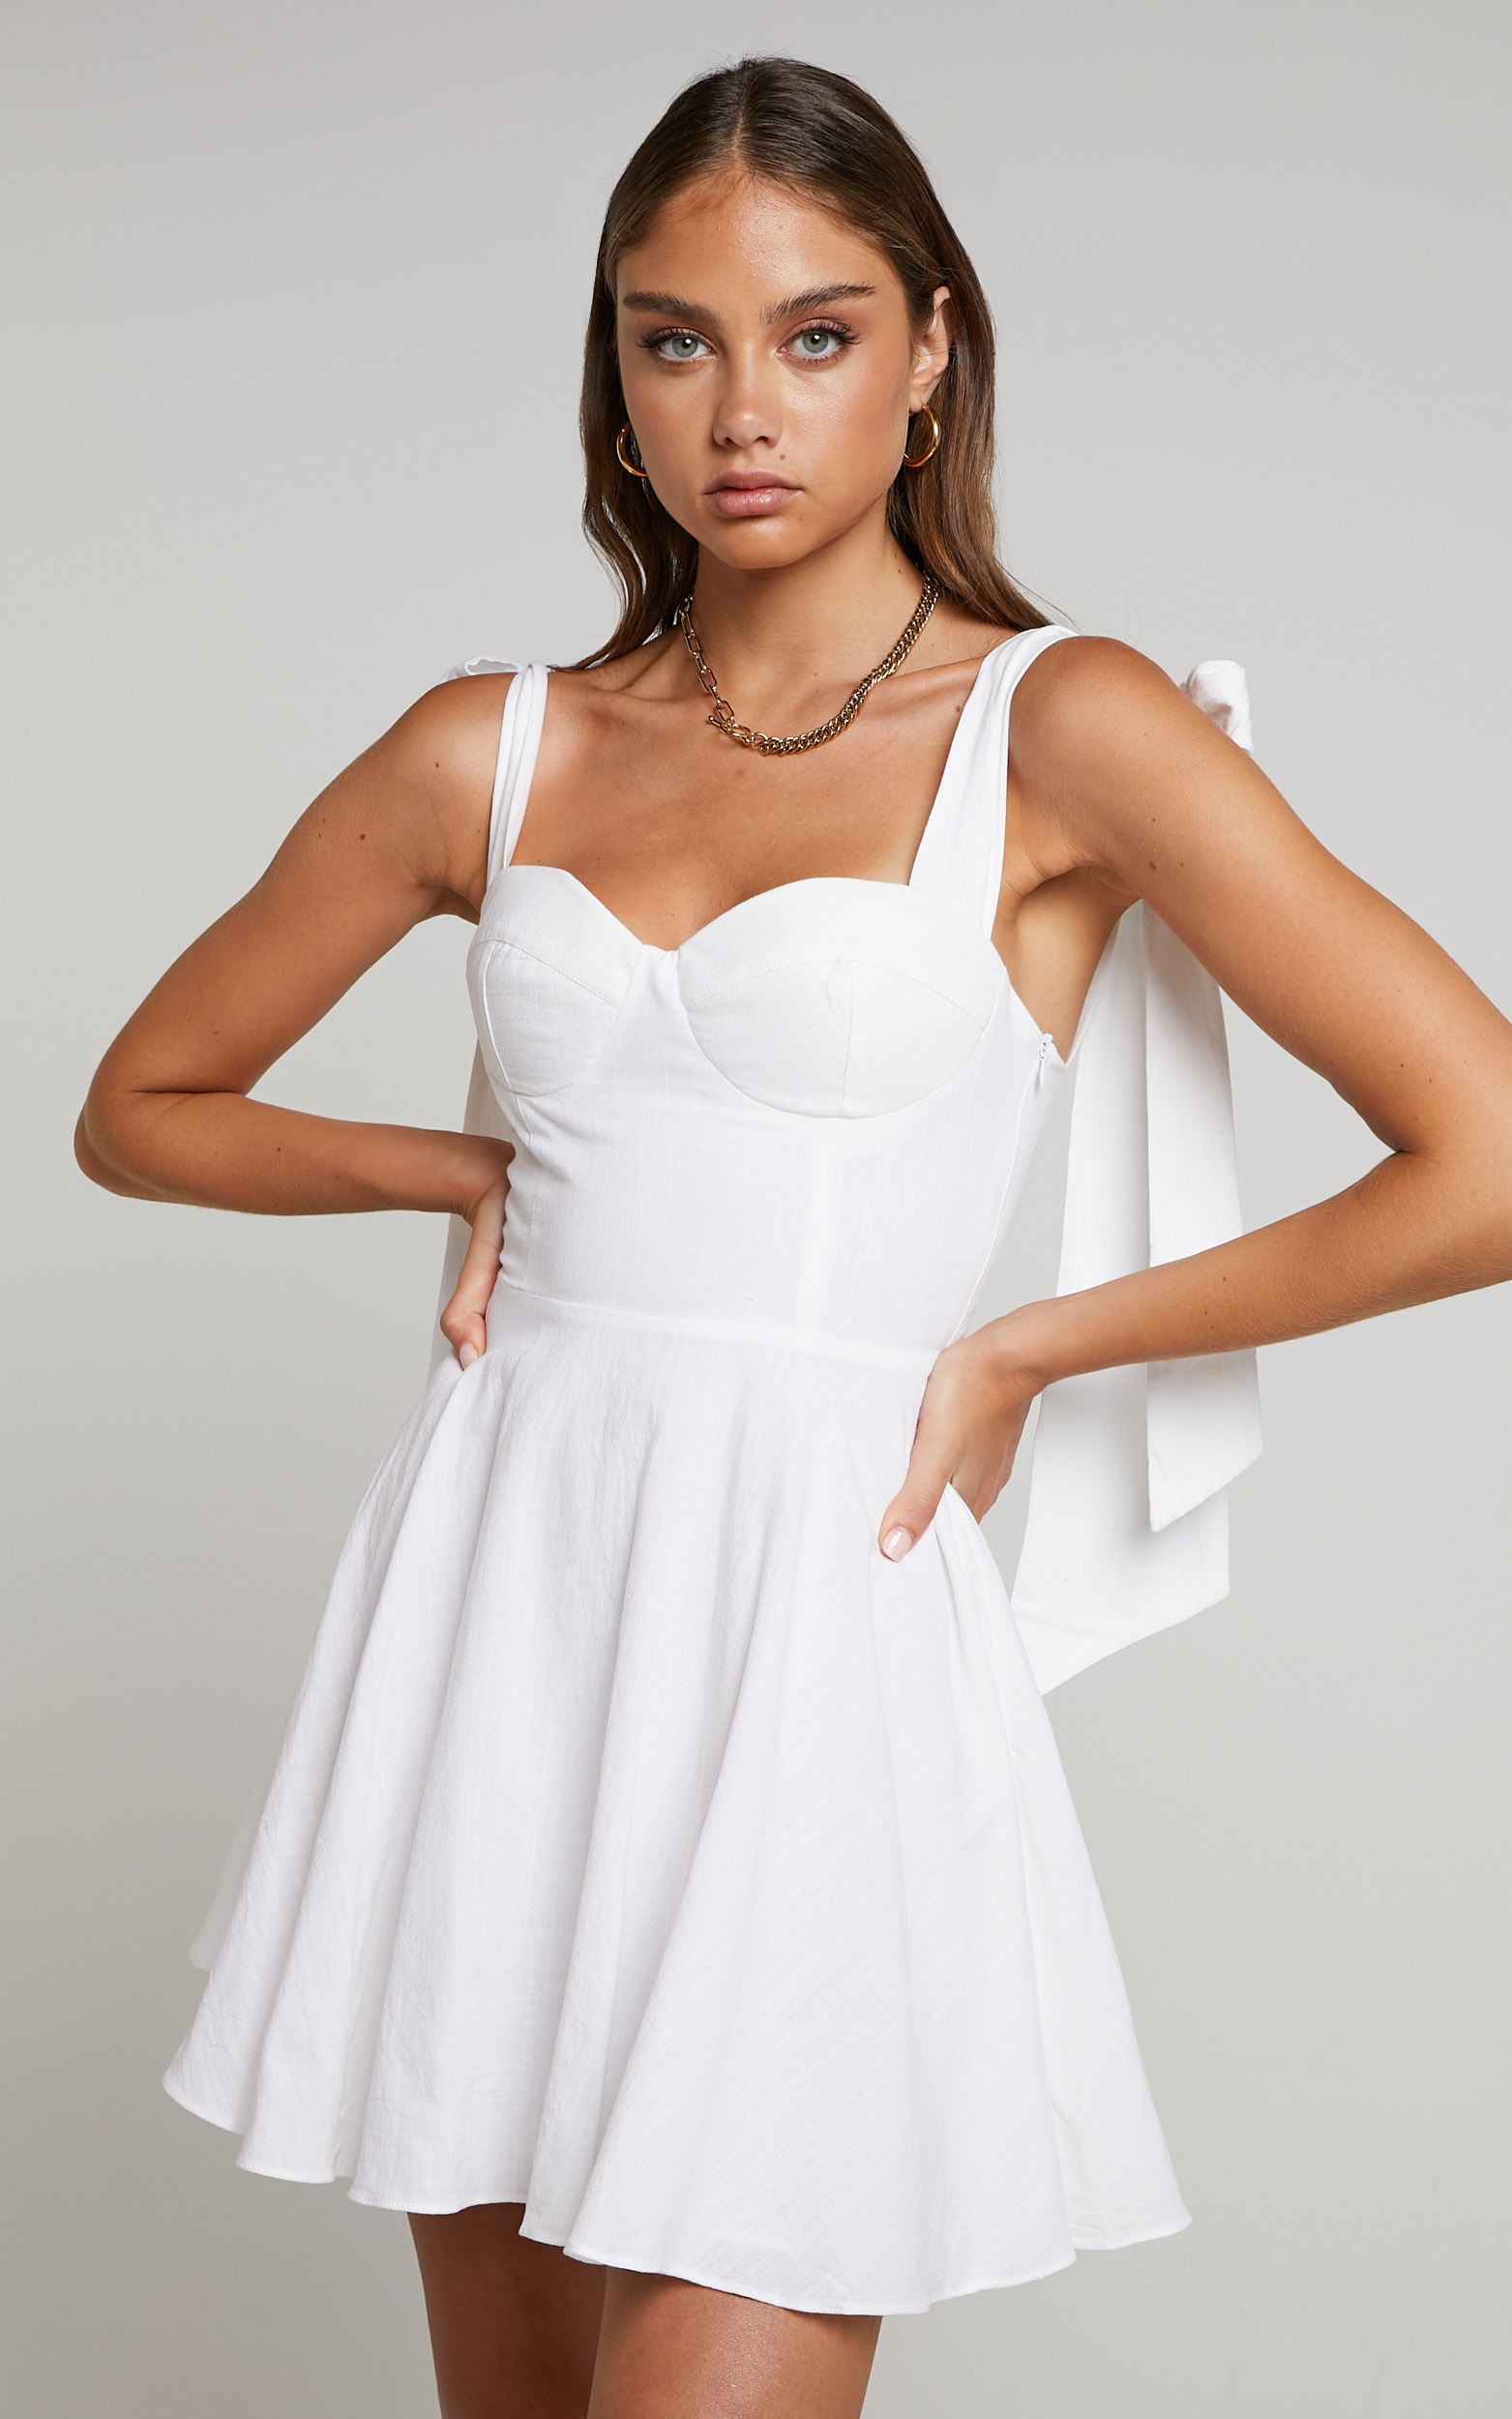 Girley Bow Strap Mini Dress in White - 04, WHT1, hi-res image number null